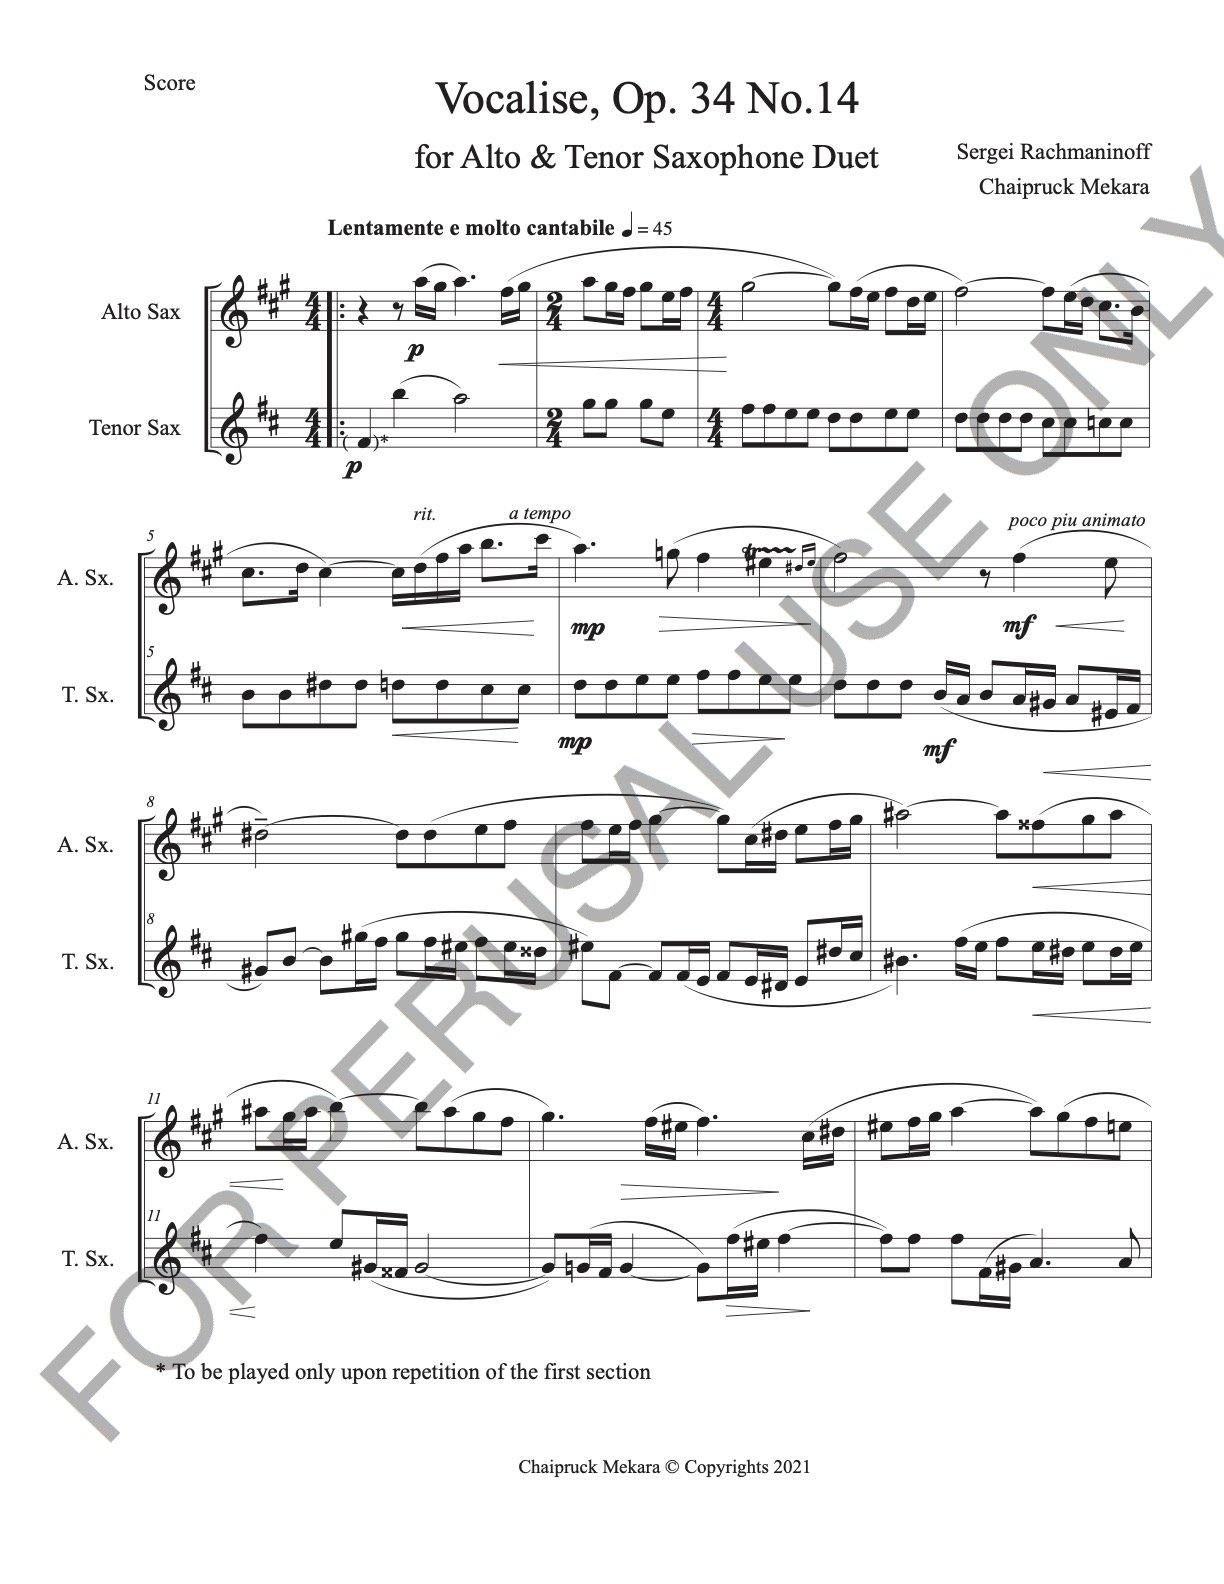 Vocalise, Op. 34 no.14 by Sergei Rachmaninoff for Alto and Tenor Sax Duet (score+parts) - ChaipruckMekara